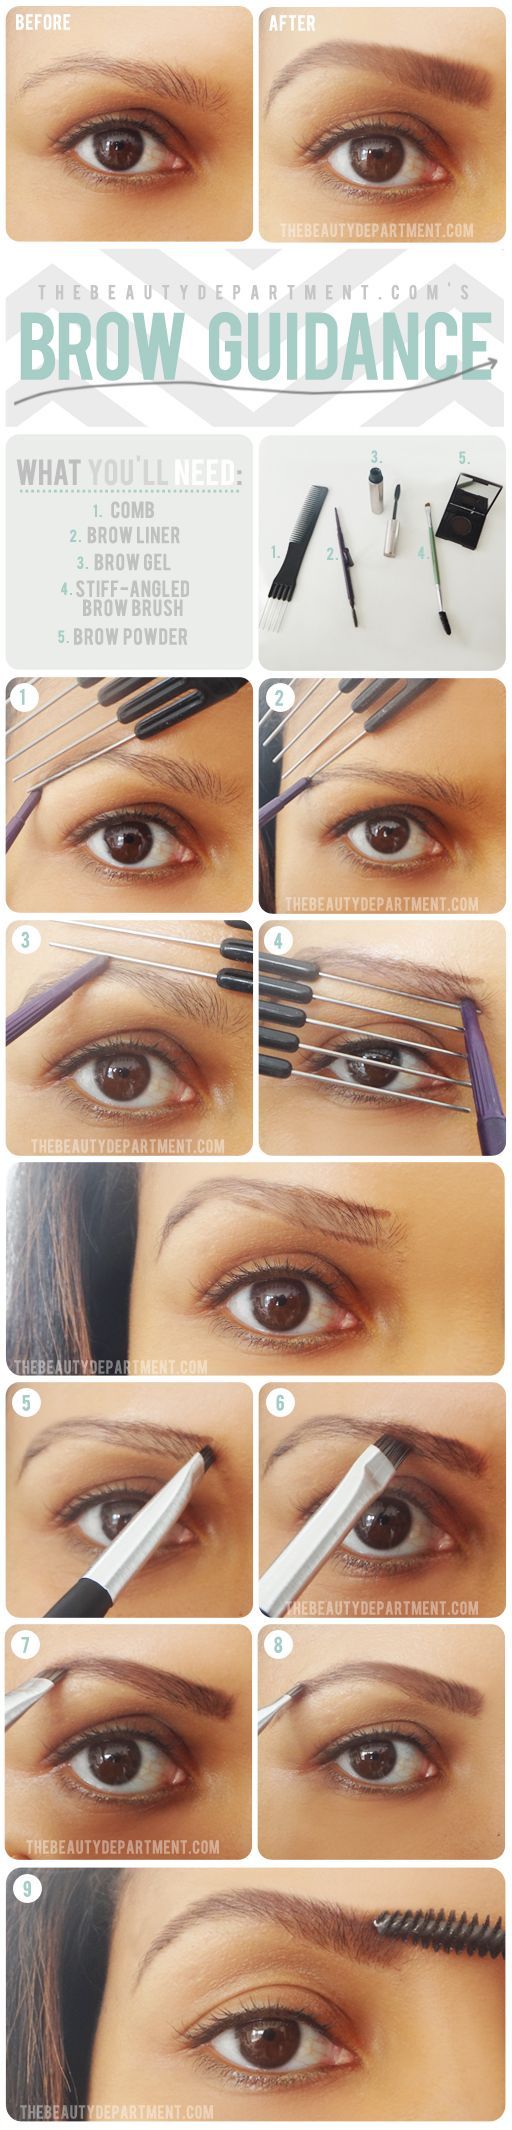 More help for brows! Grab a straight edge, outline the perimeter + shade it in!